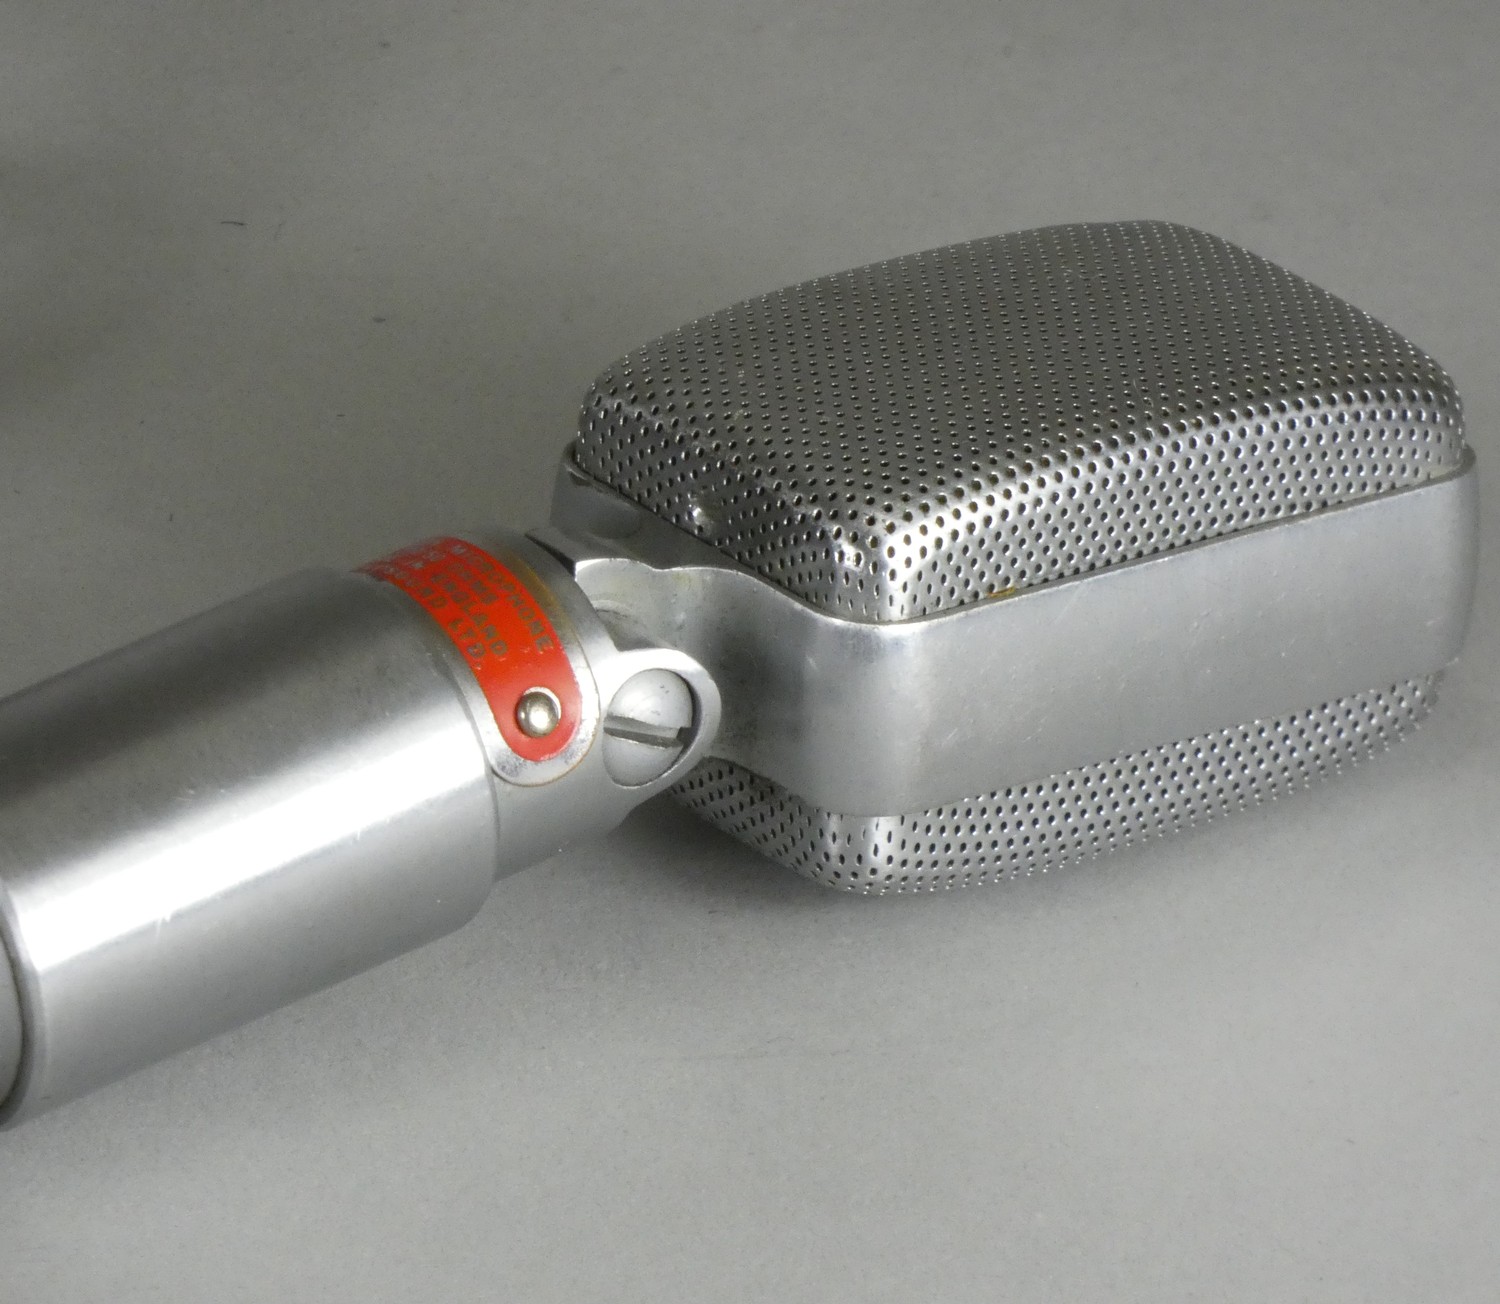 A Reslosound Ltd polished aluminium microphone 30/50 OHMS, complete with connecting plug and lead. - Image 2 of 3